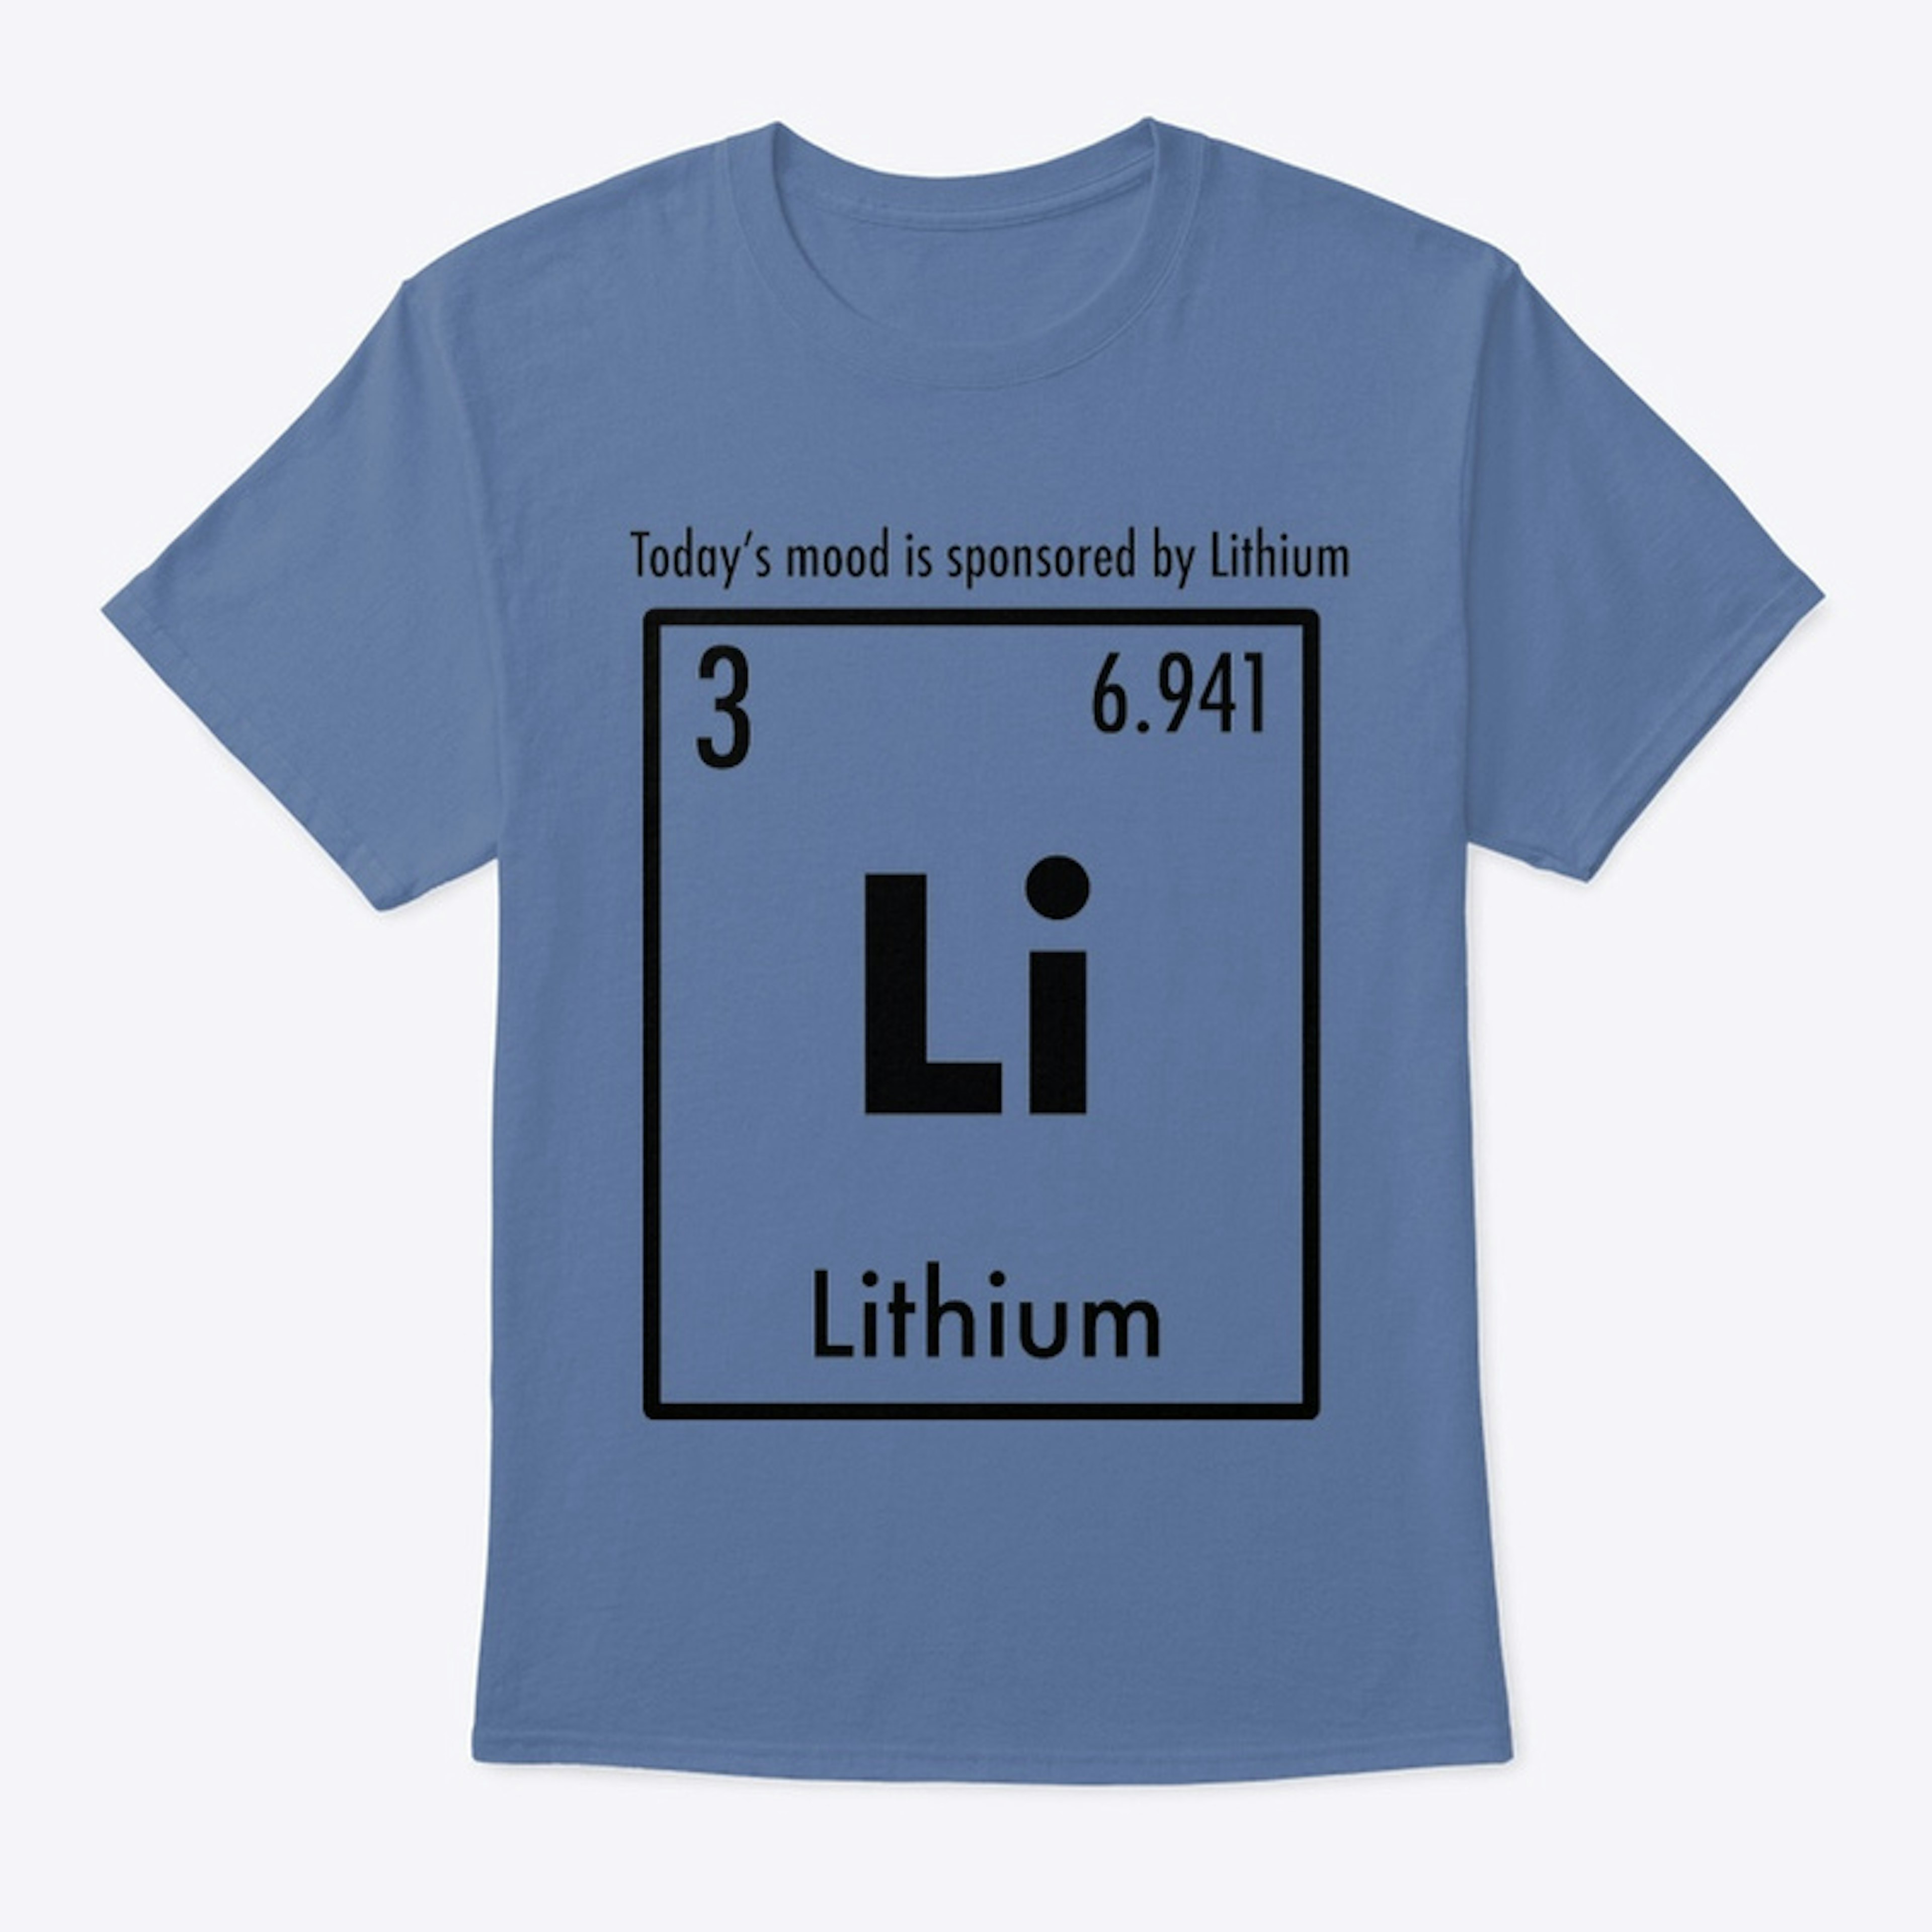 Sponsored by Lithium